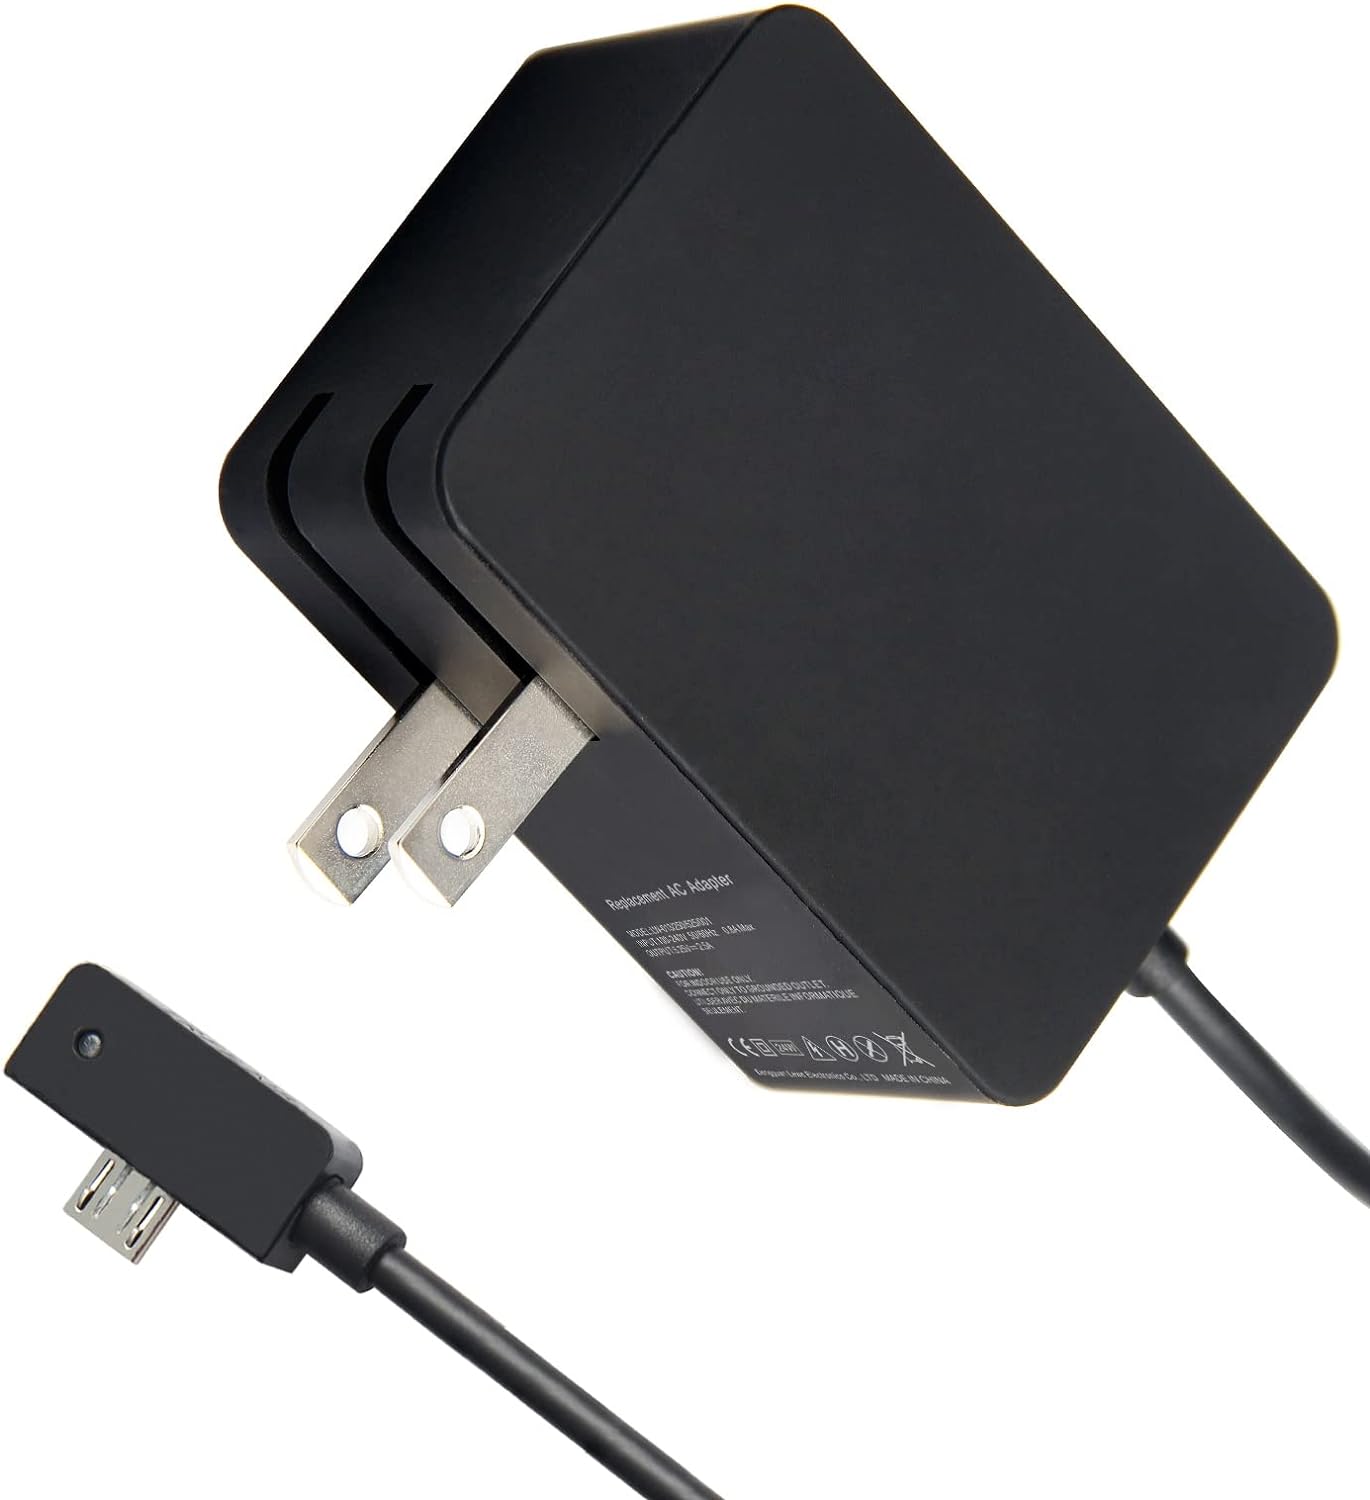 13W 5.2V 2.5A Surface 3 Charger AC Power Adapter for Microsoft Surface 3, Model 1623 1624 1645 Tablet with USB Charging